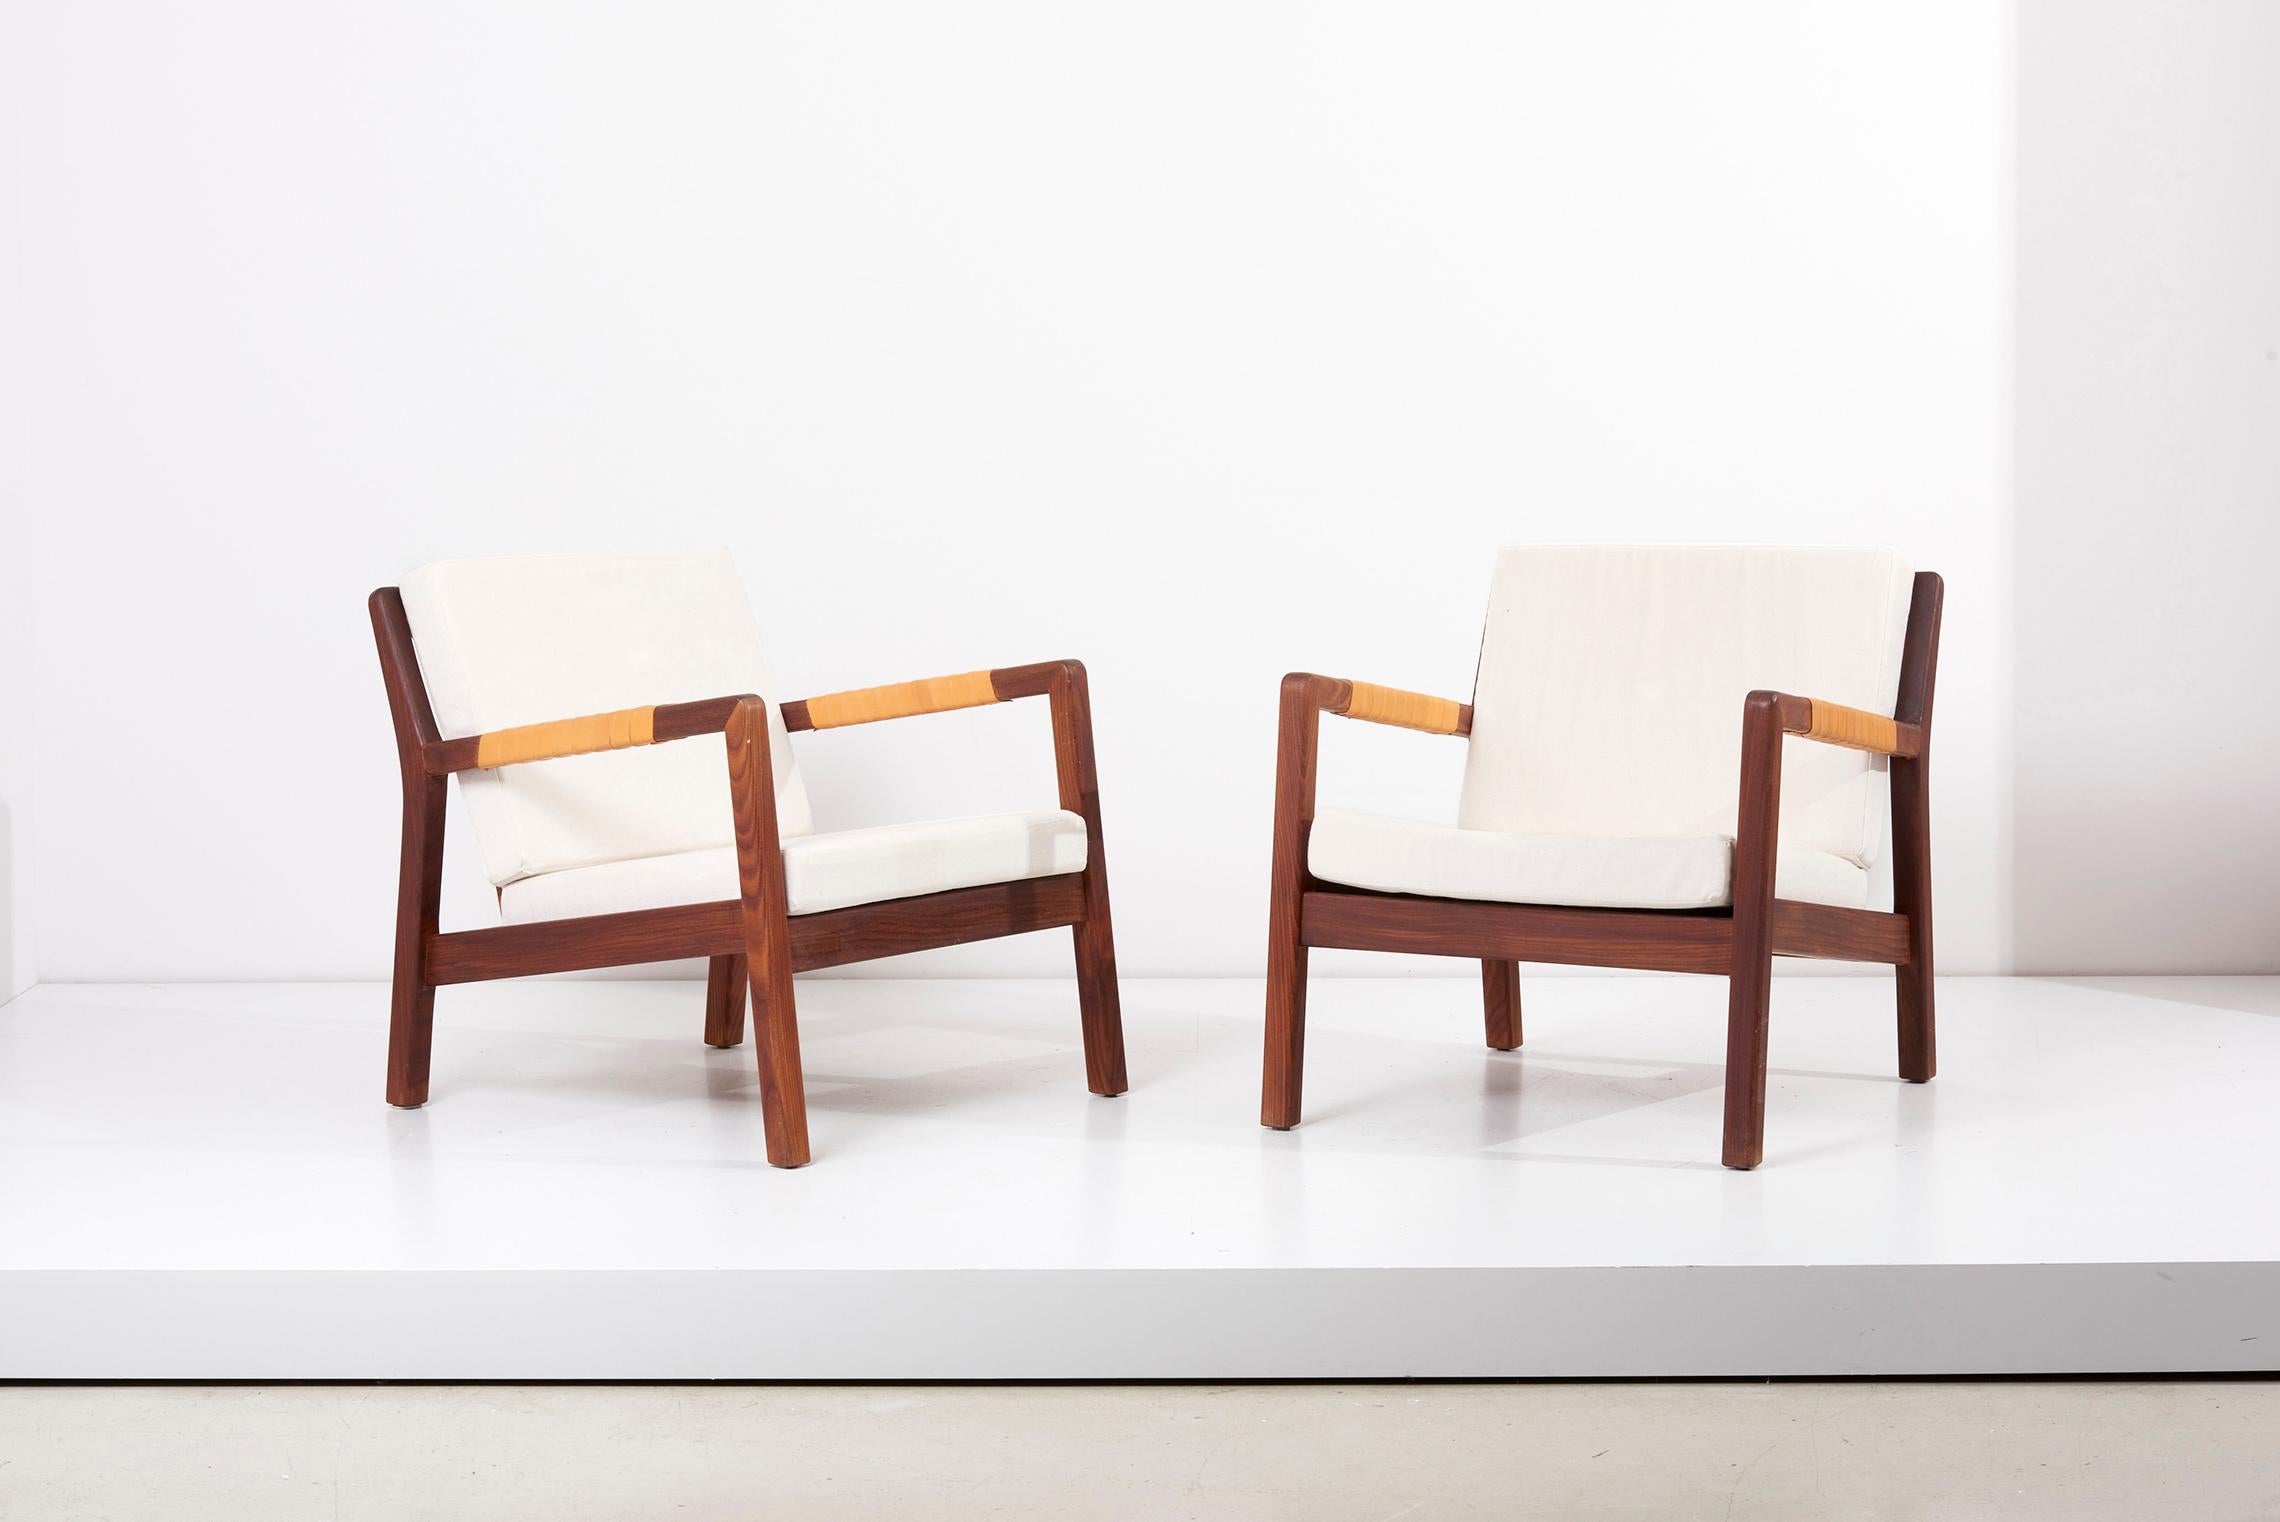 Pair of lounge chairs by Carl Gustav Hiort af Ornäs, 1950s
Rare lounge chairs model Trienna by Carl-Gustav Hiort af Orna¨s, Finland, 1950s. Teak, leather covered armrests, back with braided leather straps, loose cushions. The chairs have been